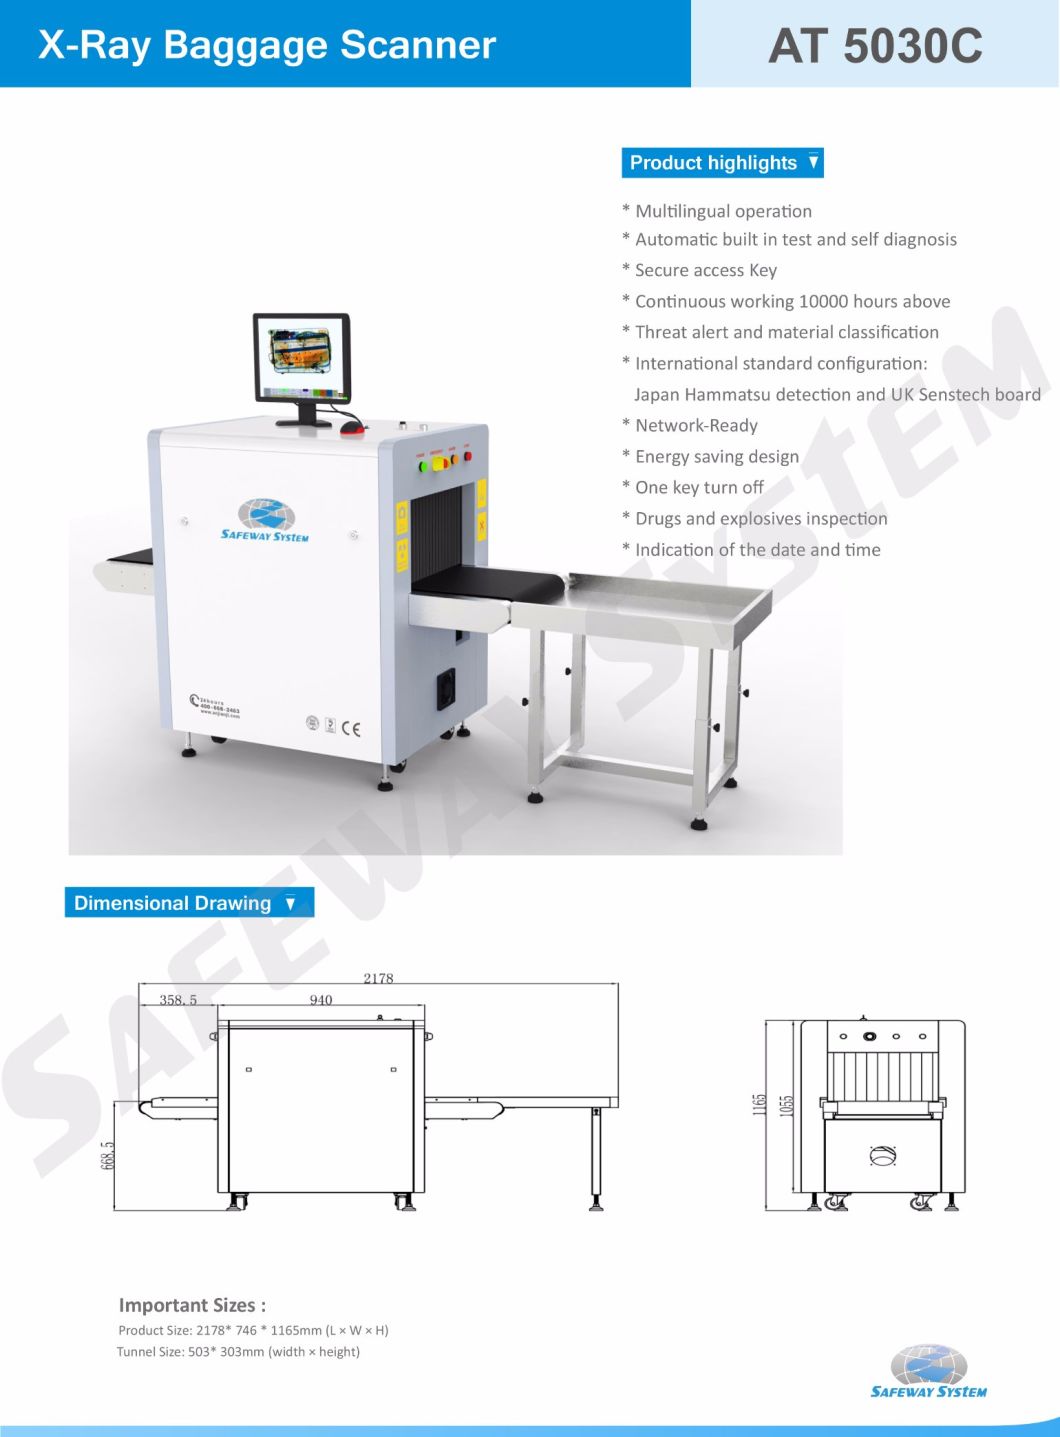 Security Systems X-ray Cargo/Luggage Screening Scanner Detector Machine